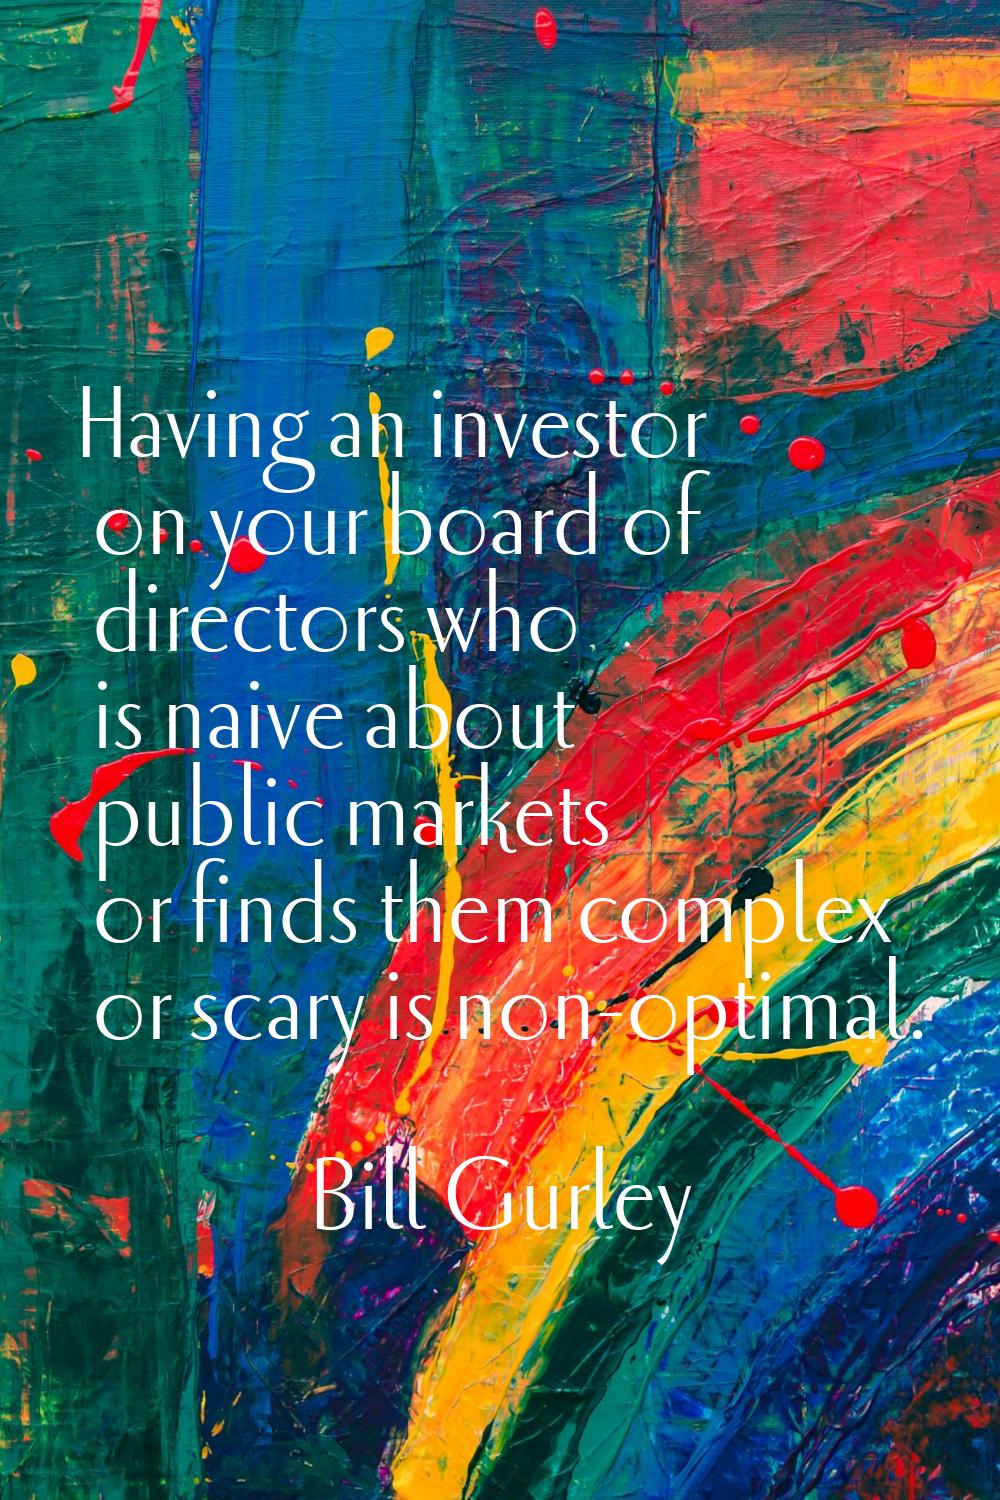 Having an investor on your board of directors who is naive about public markets or finds them compl